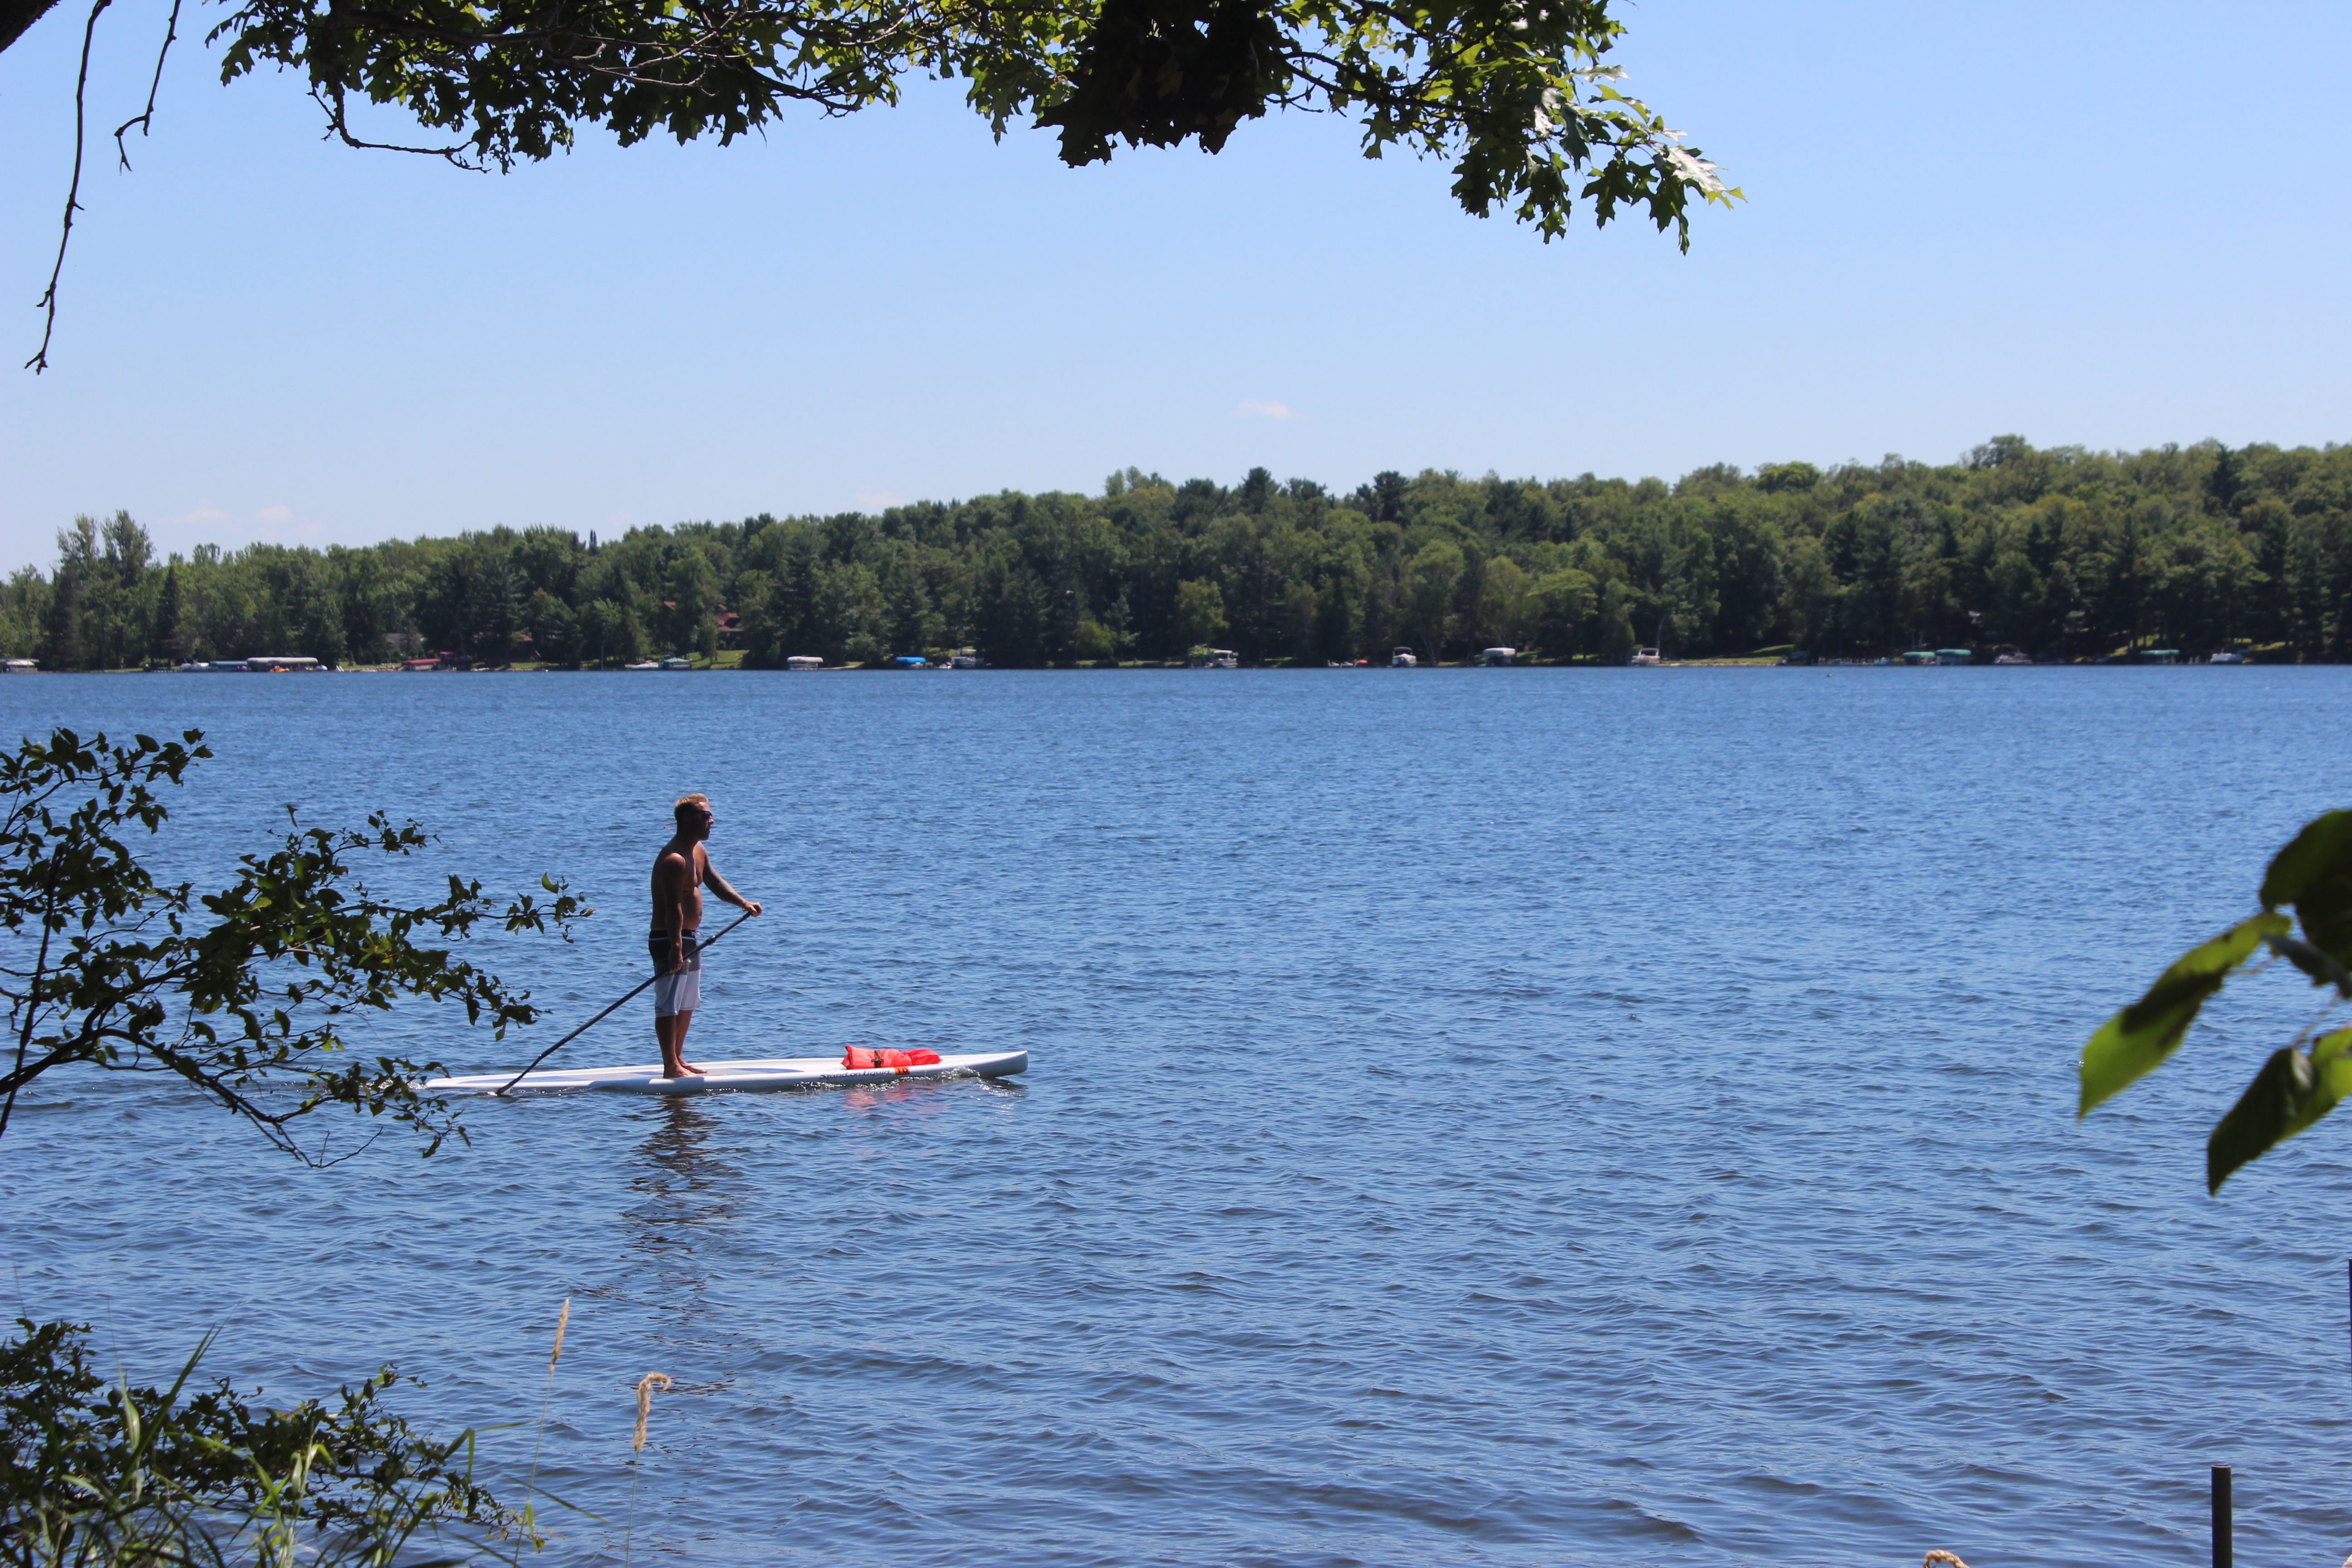 Standing on a paddle board